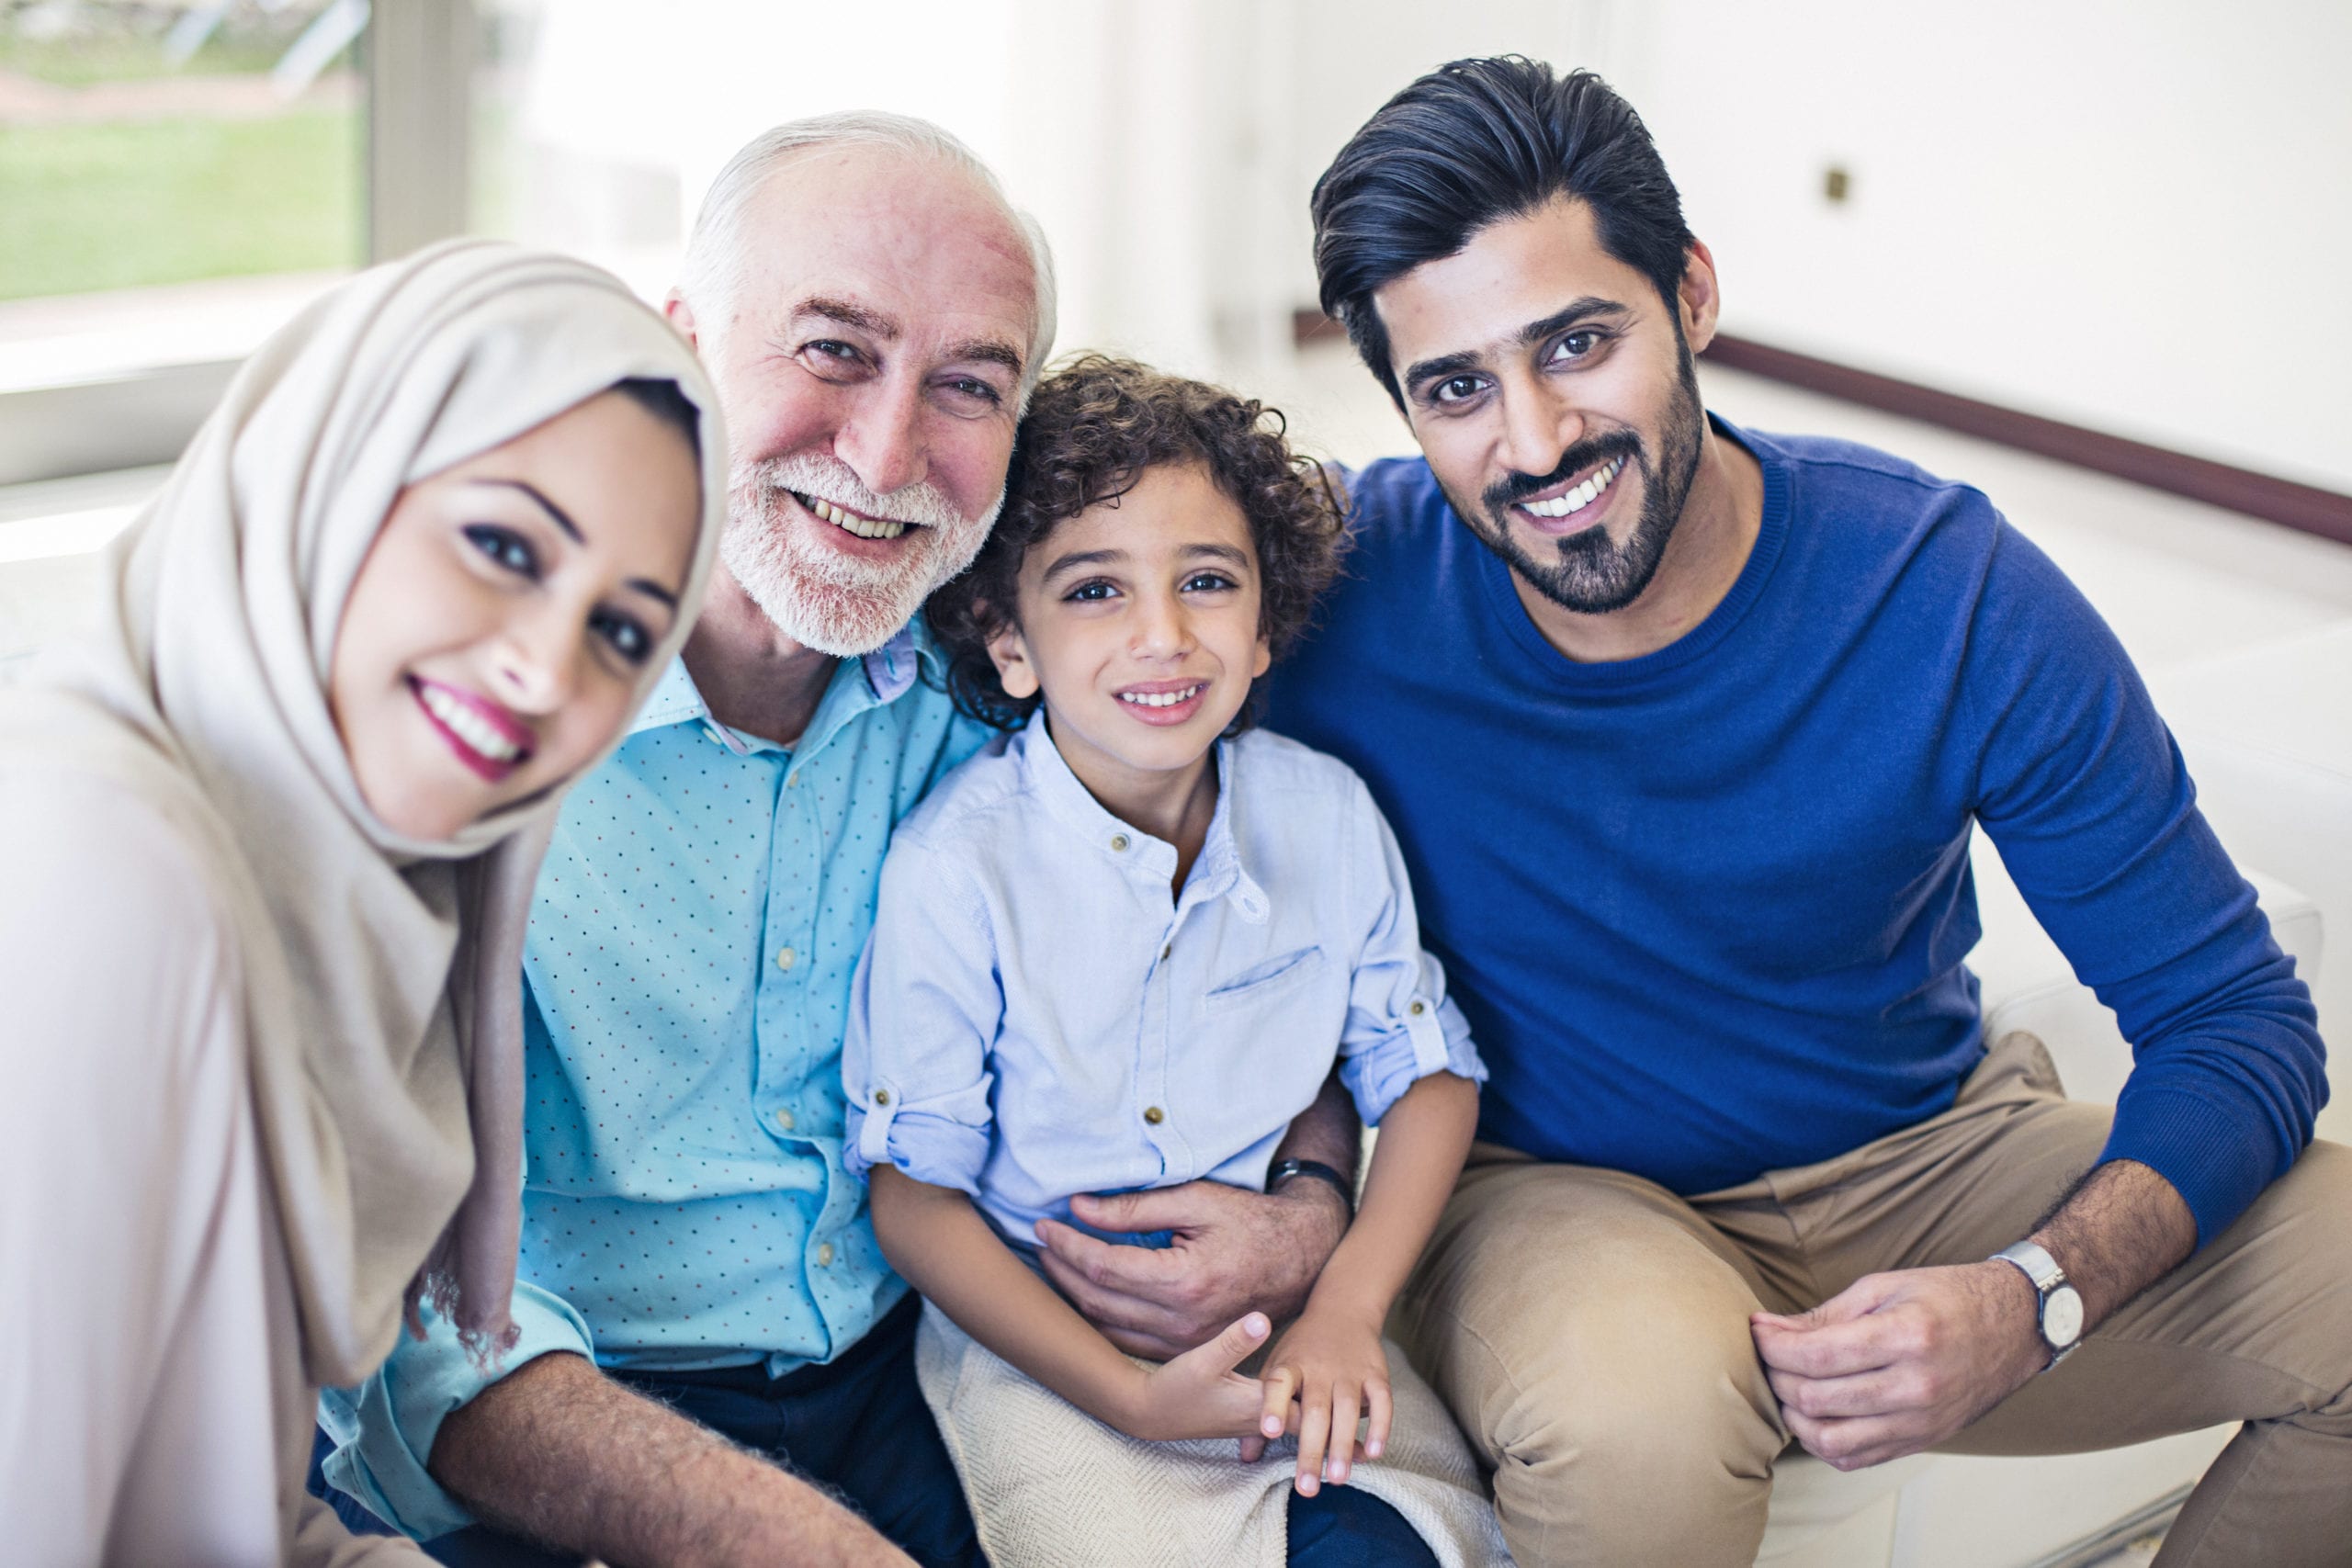 Muslim family portrait, kid, parents and grandfather all looking at the camera.